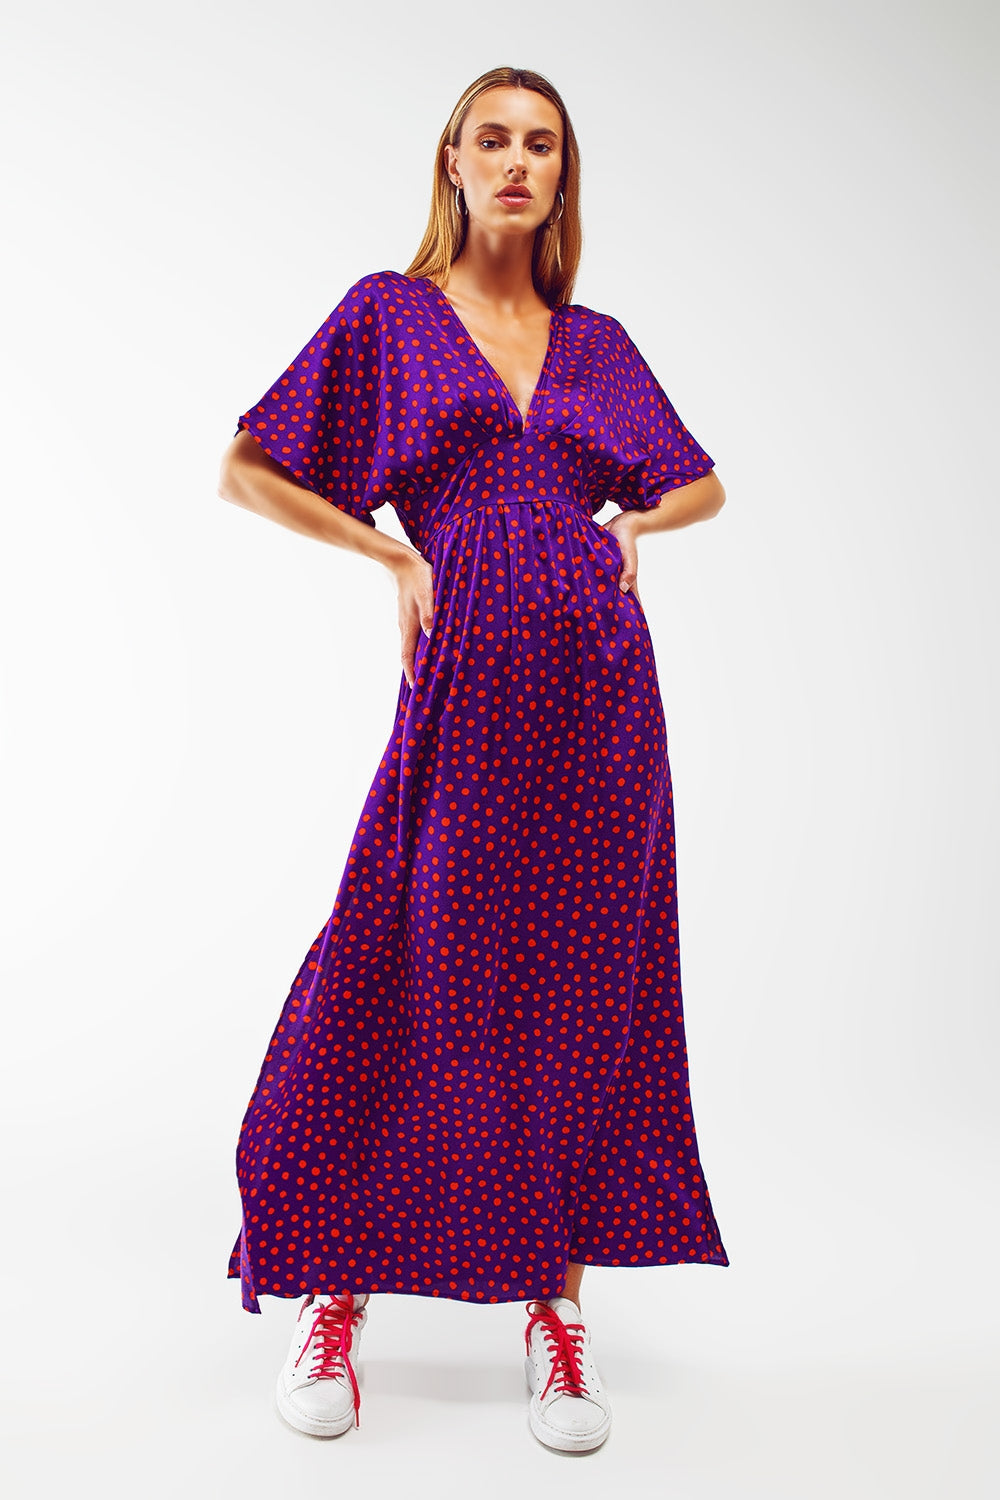 Maxi Cinched At The Waist Dress With Angel Sleeves In Purple Polka Dot - Szua Store